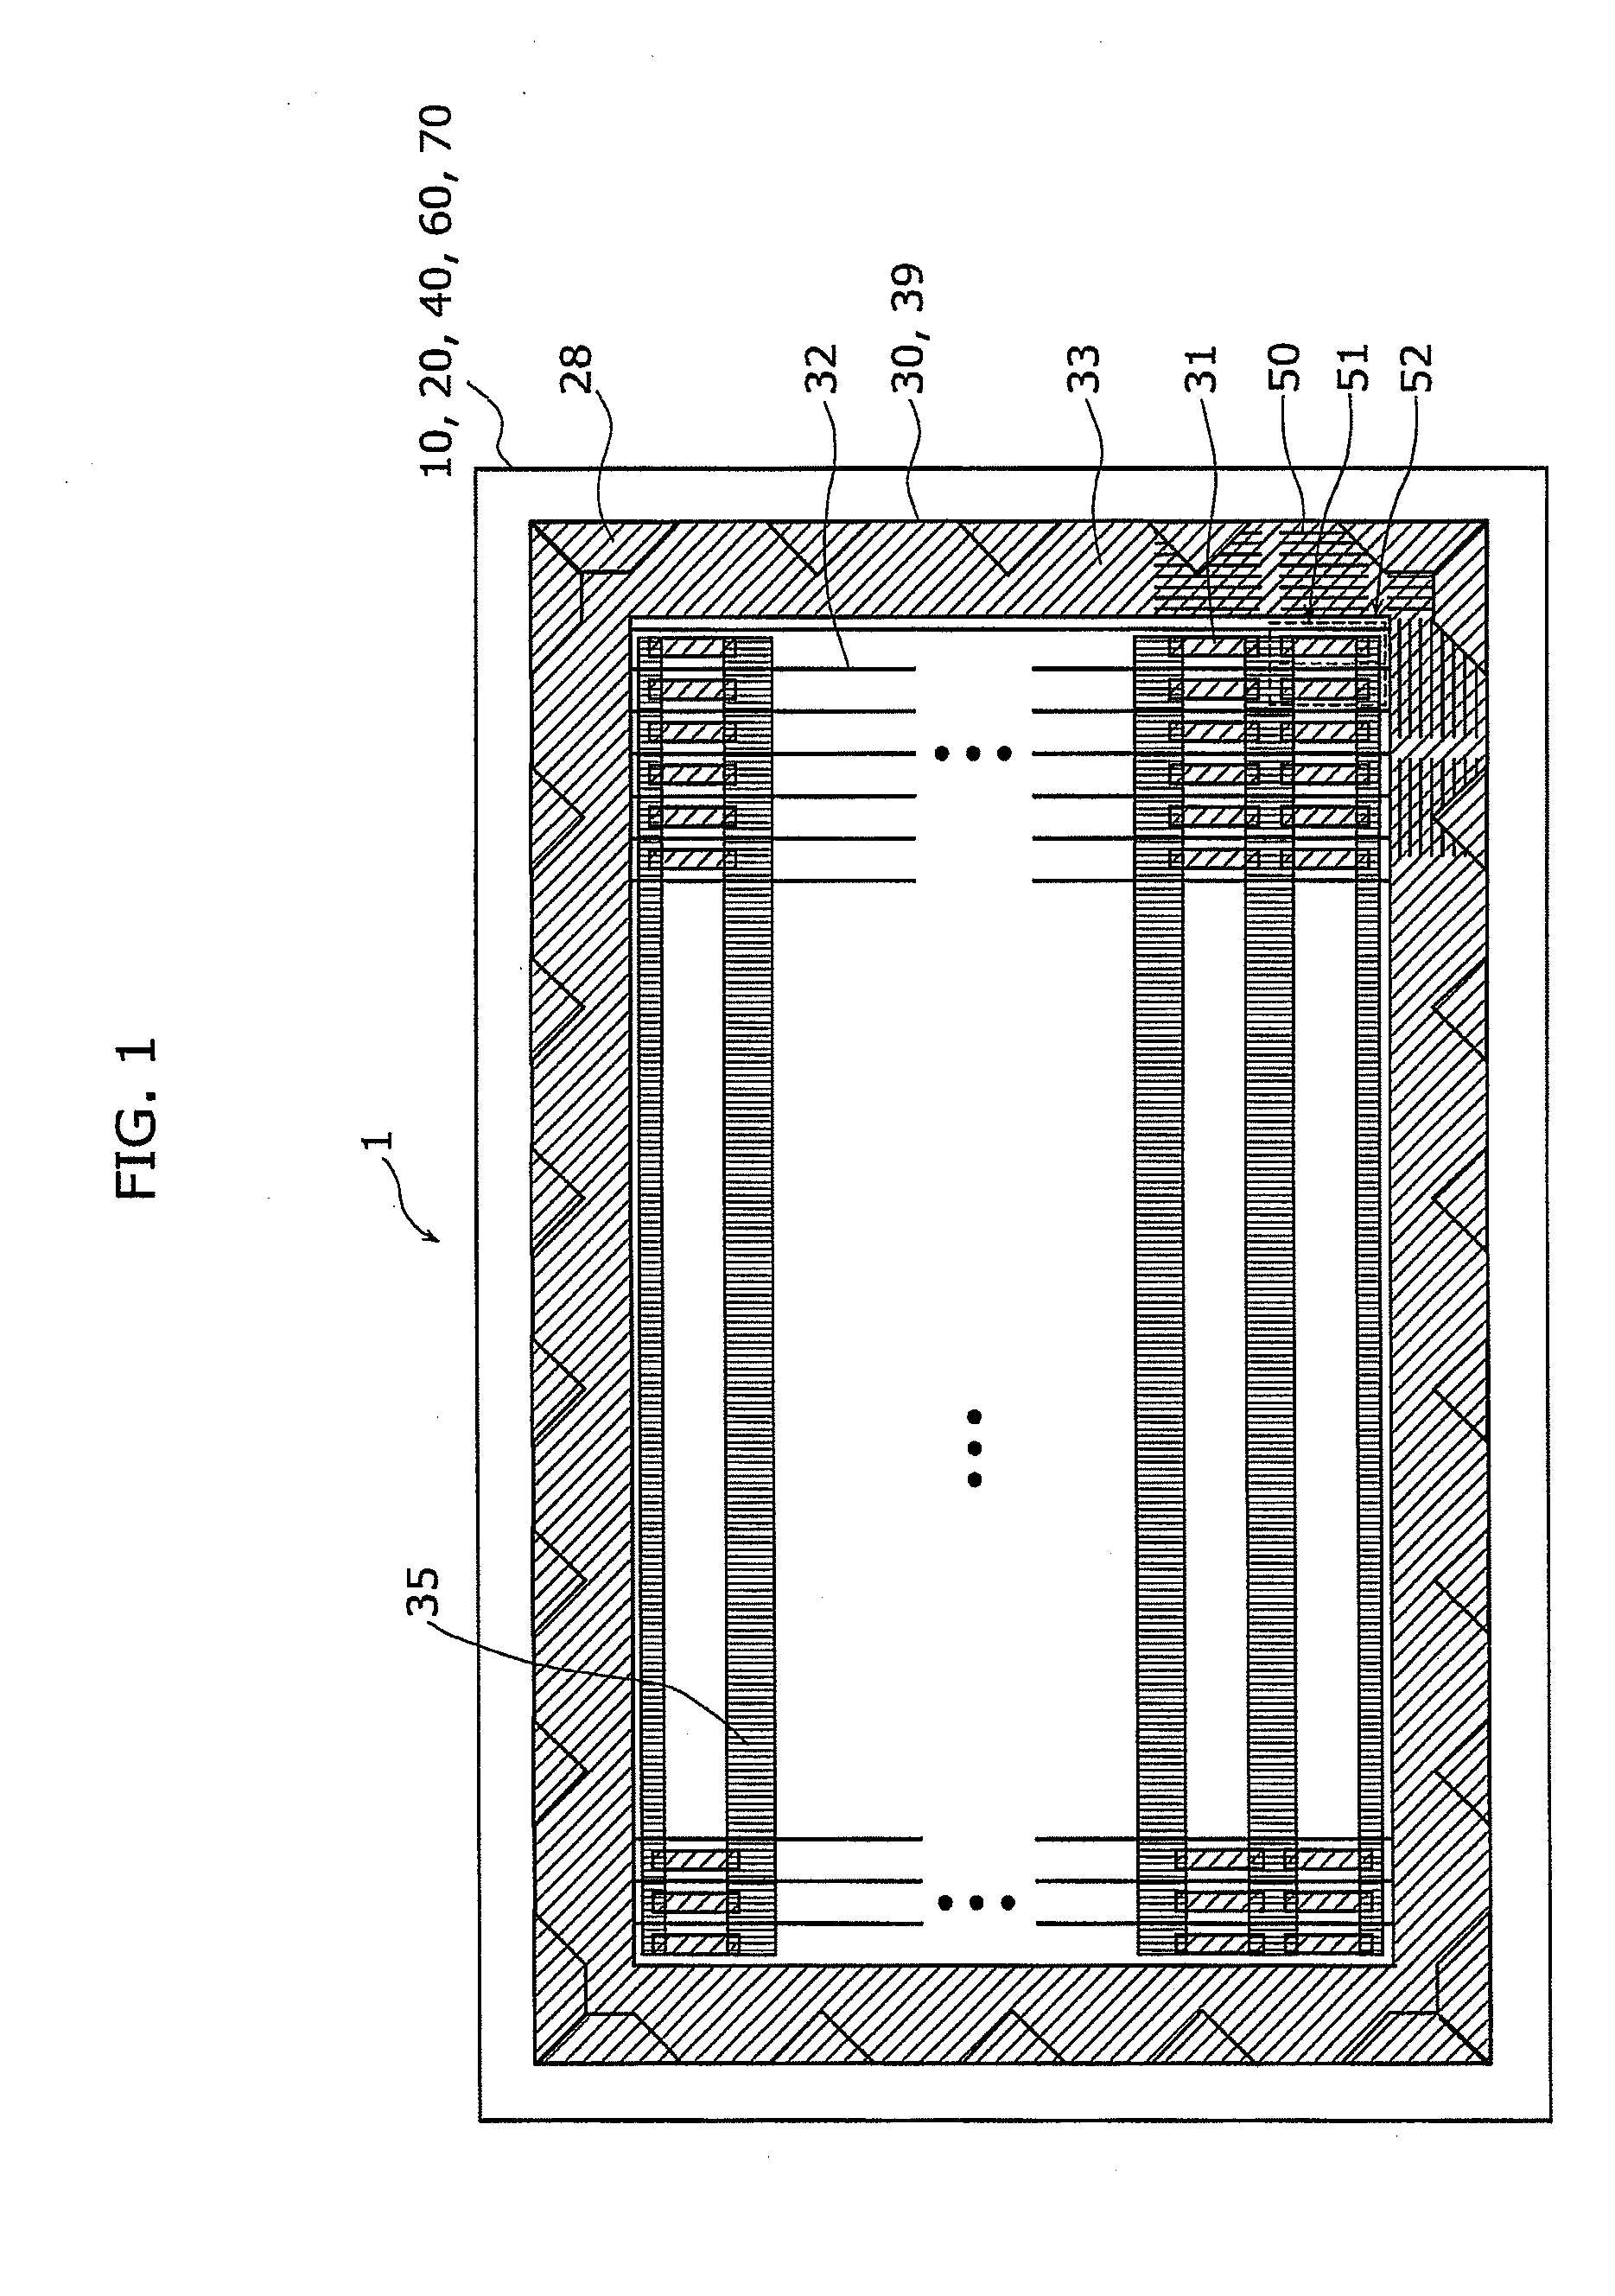 Display panel apparatus and method of fabricating display panel apparatus